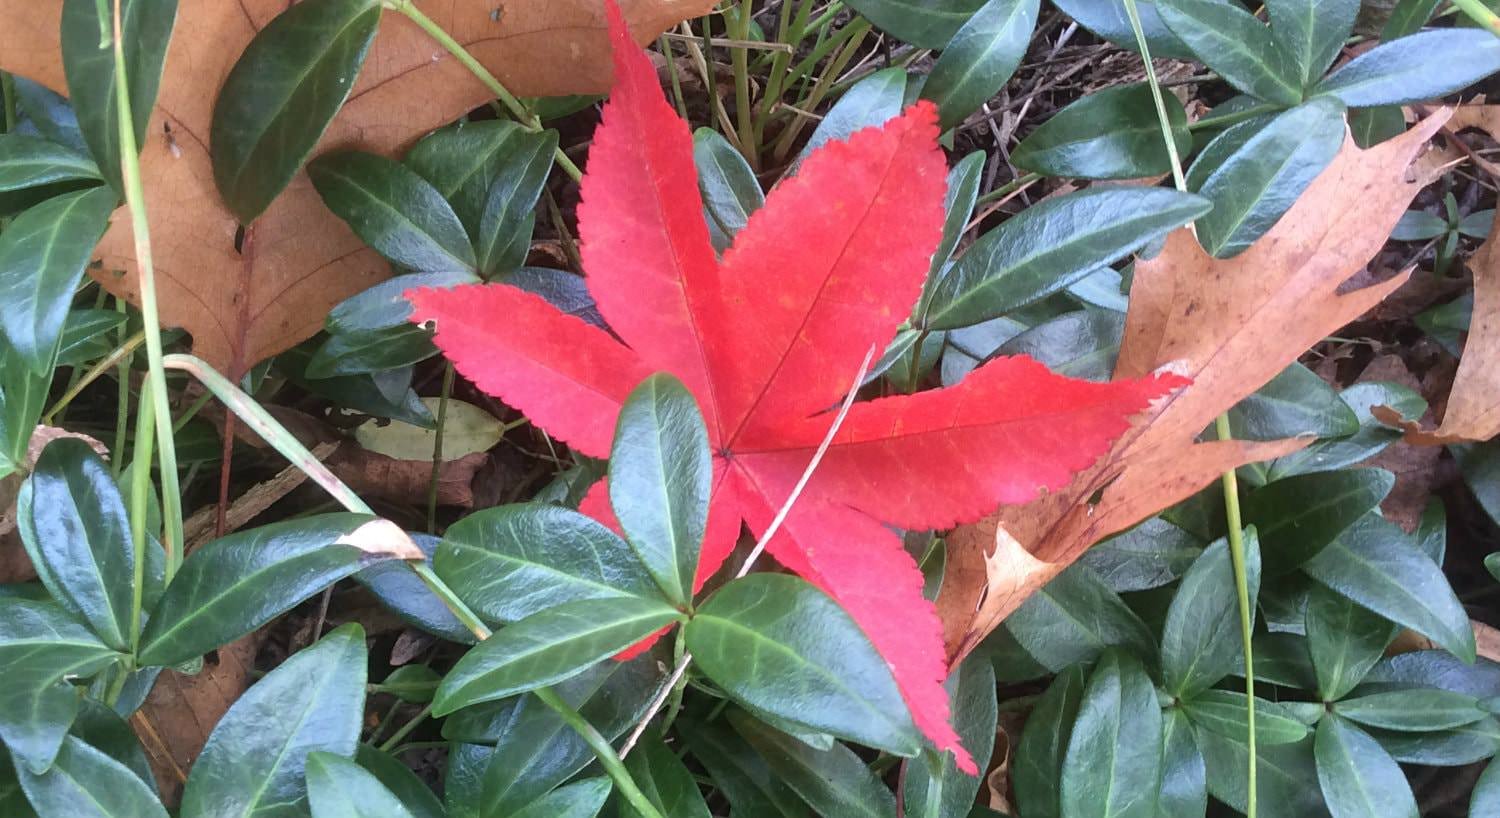 Close up view of green and brown leaves with one vibrant red leaf